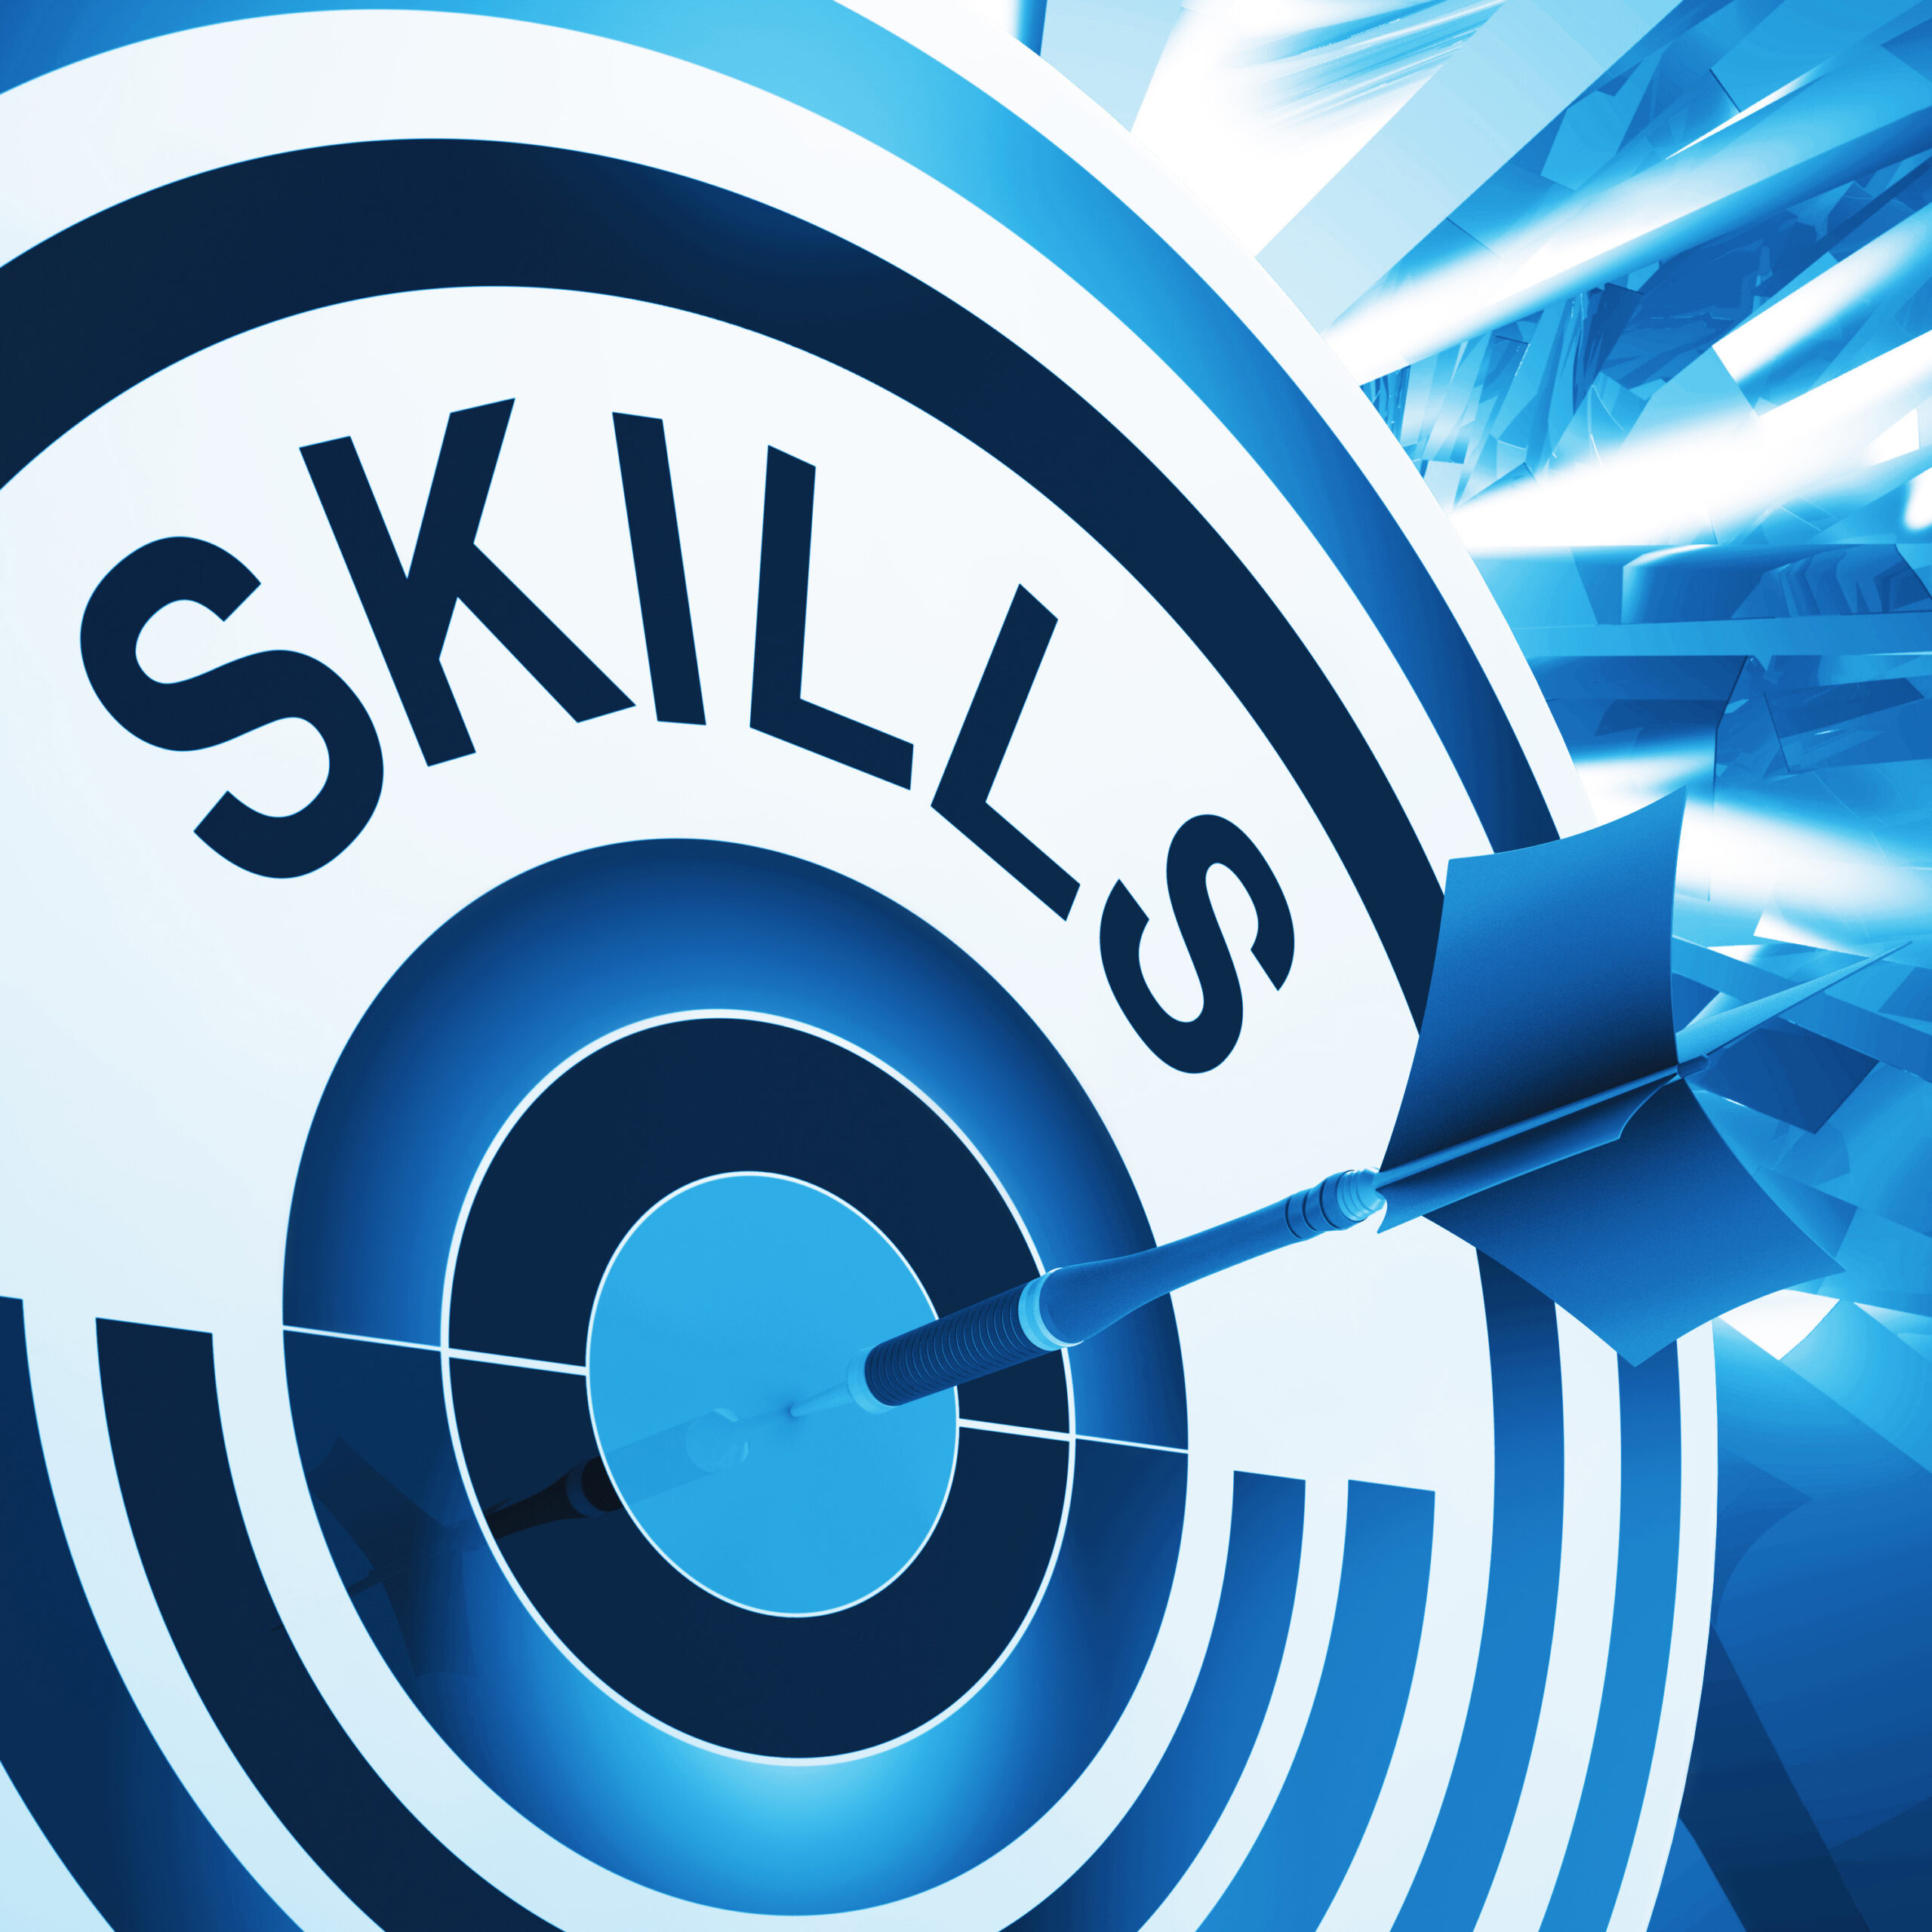 Skills Target Means Aptitude, Competence and Abilities